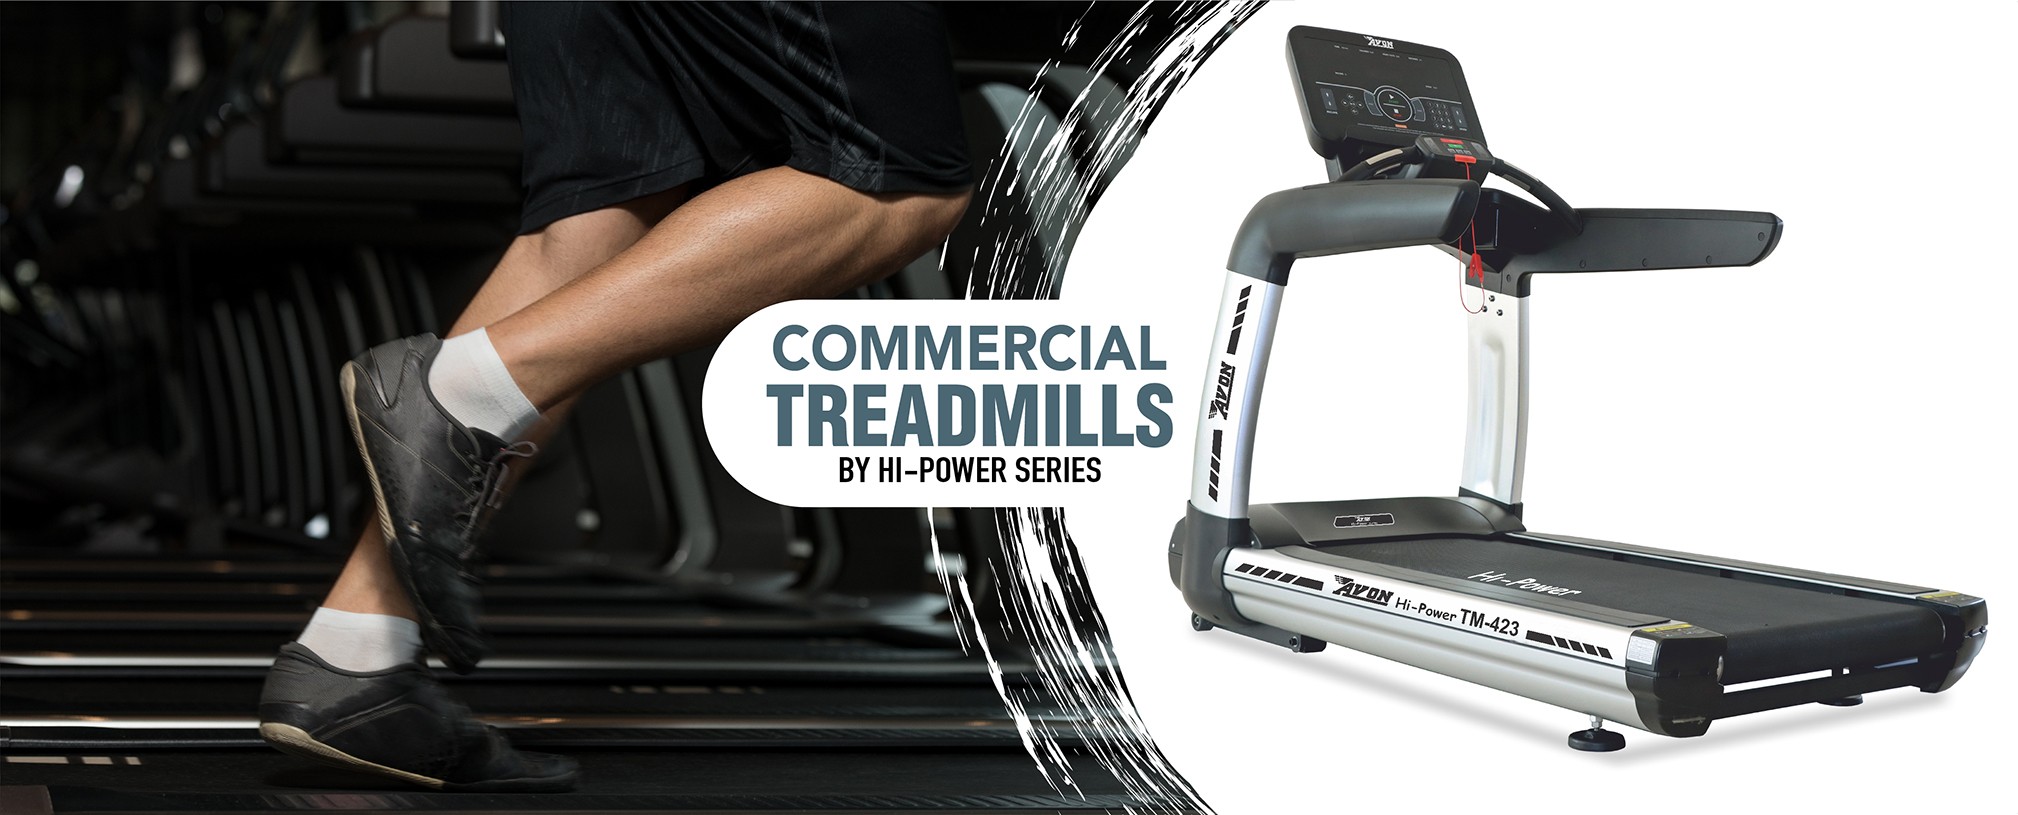 What's the best way to lose weight by running on a treadmill? TreadmillsiOMQZ03-48-14